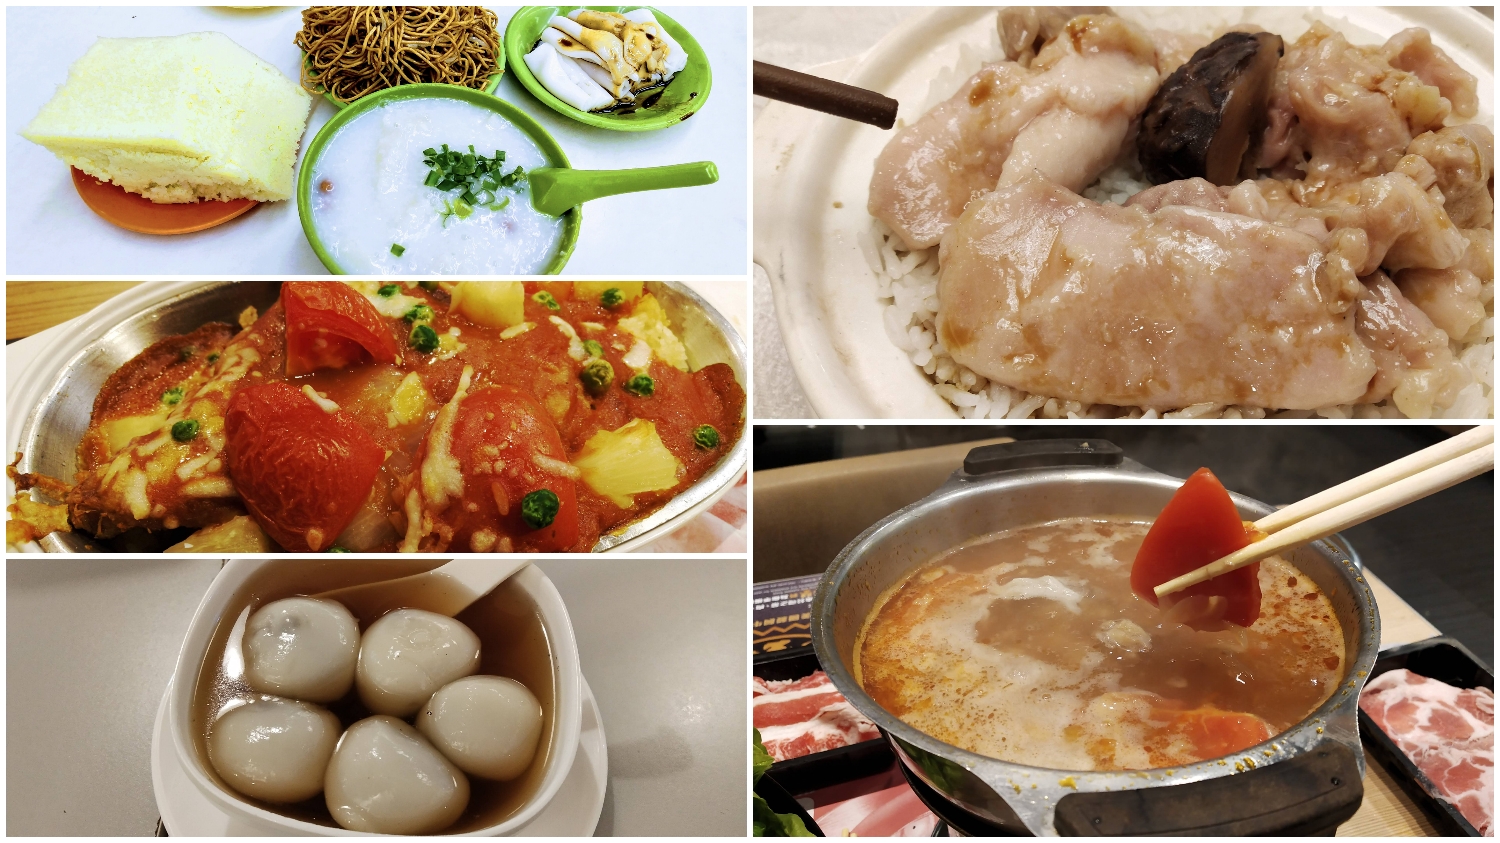 What authentic local food can travelers eat to keep warm in Hong Kong?